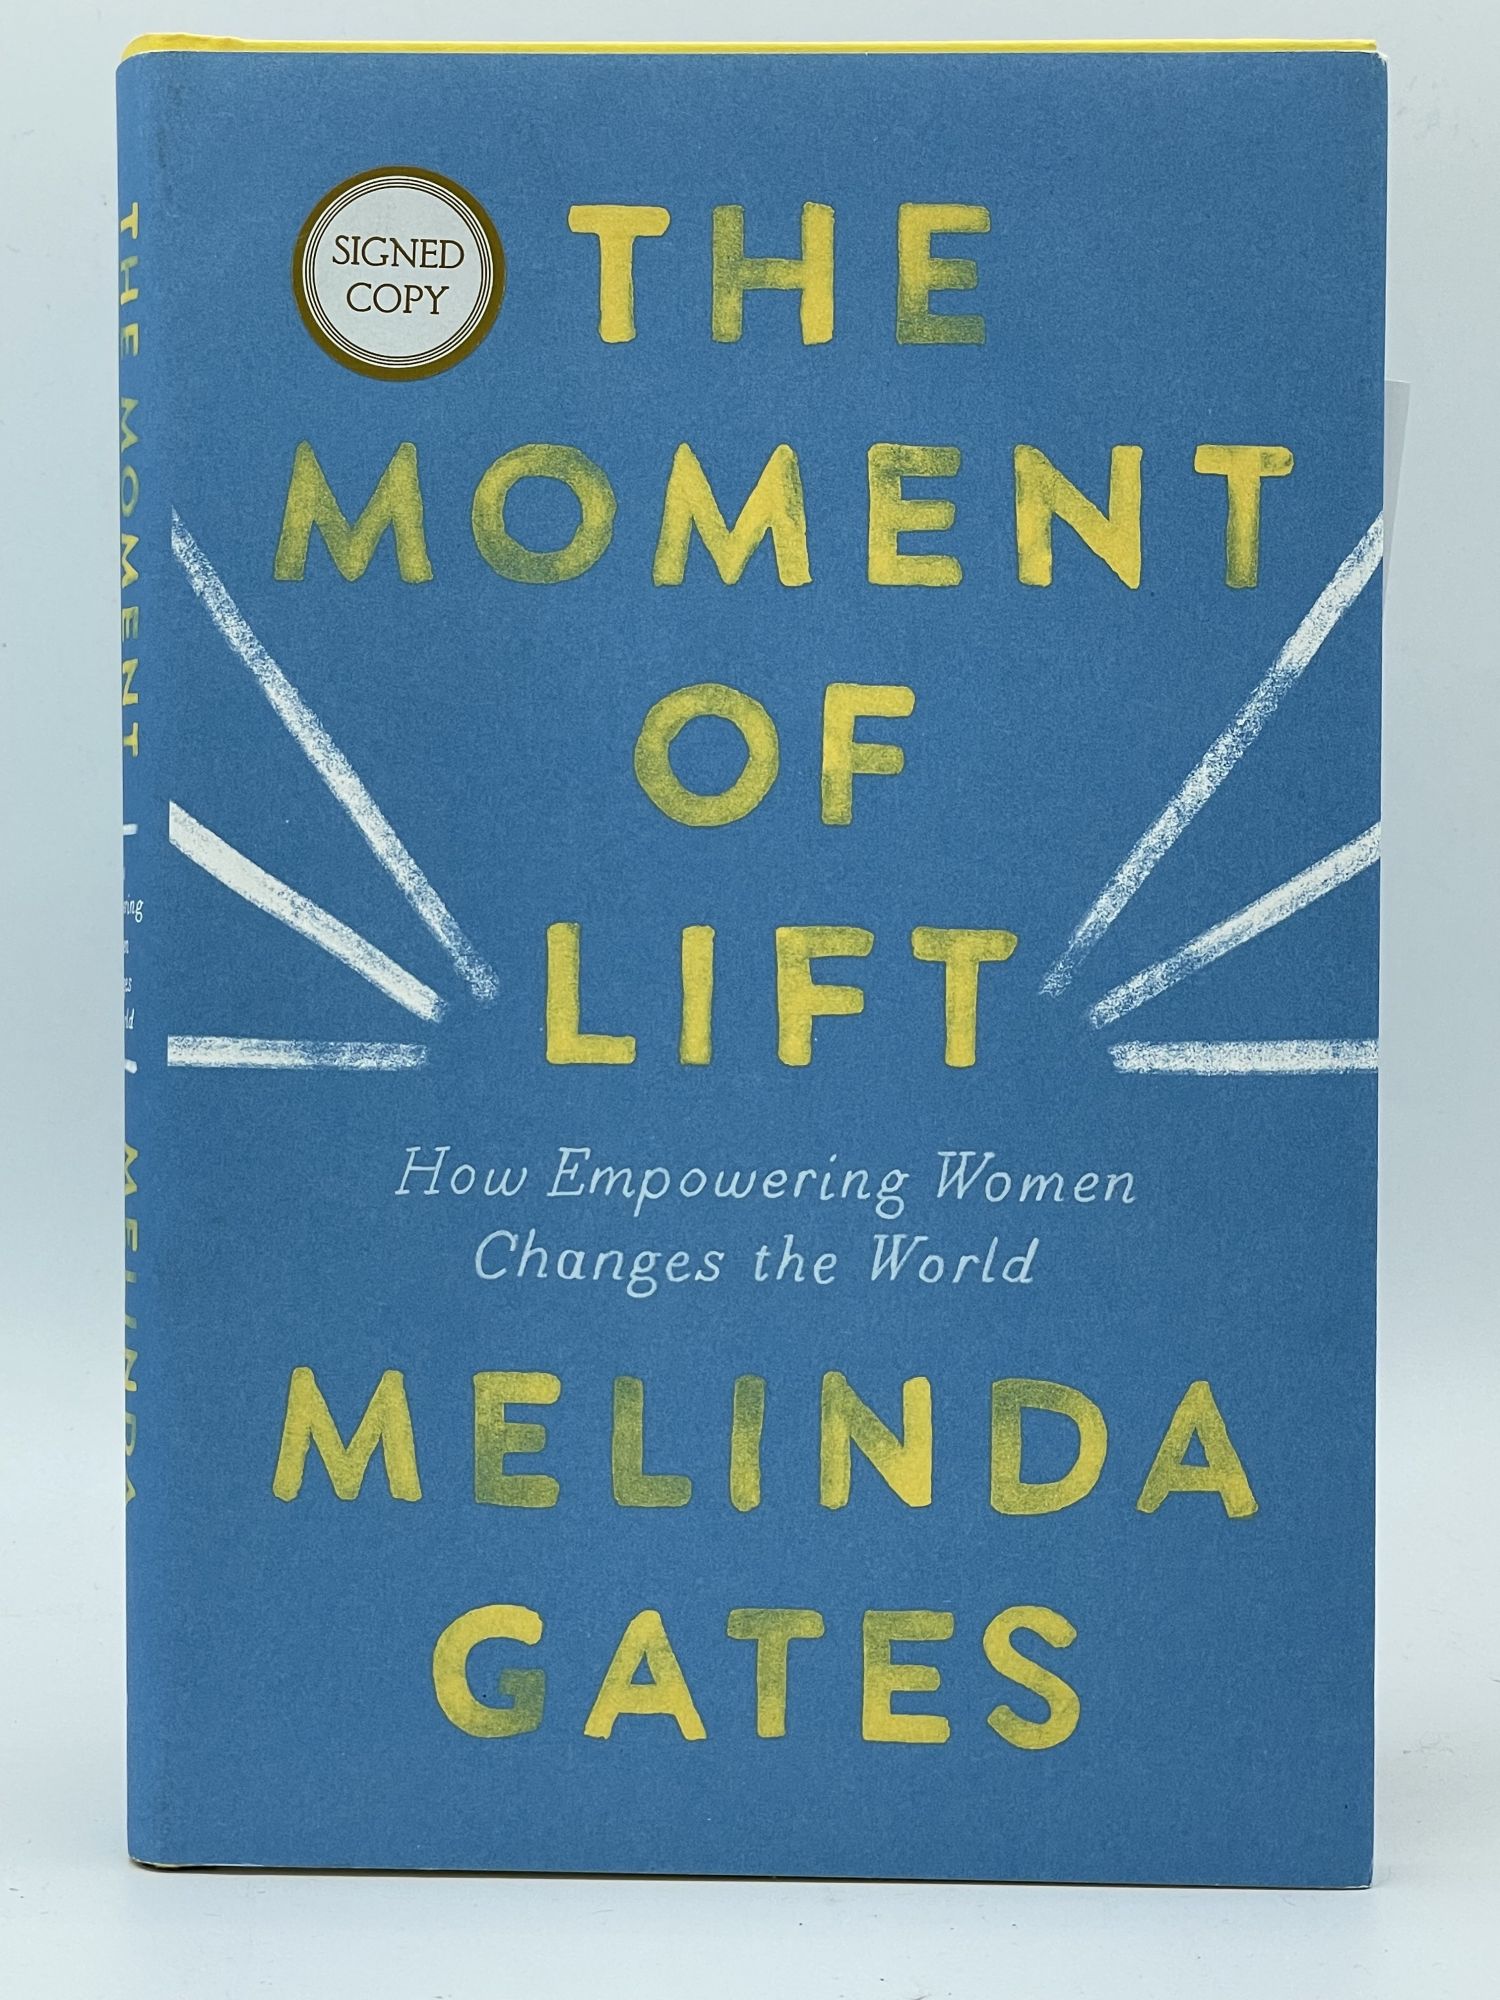 The Moment of Lift; How empowering women changes the world GATES, Melinda [SIGNED] [Very Good] [Hardcover] 8vo. Boards. Dust jacket. 273 pp. Signed on bound-in page.  Signed copy  sticker on front cover. Minor shelf wear. Comes with 2 postcards from the book's promotional tour. This is a signed copy of Melinda Gates' book about capitalist feminism.